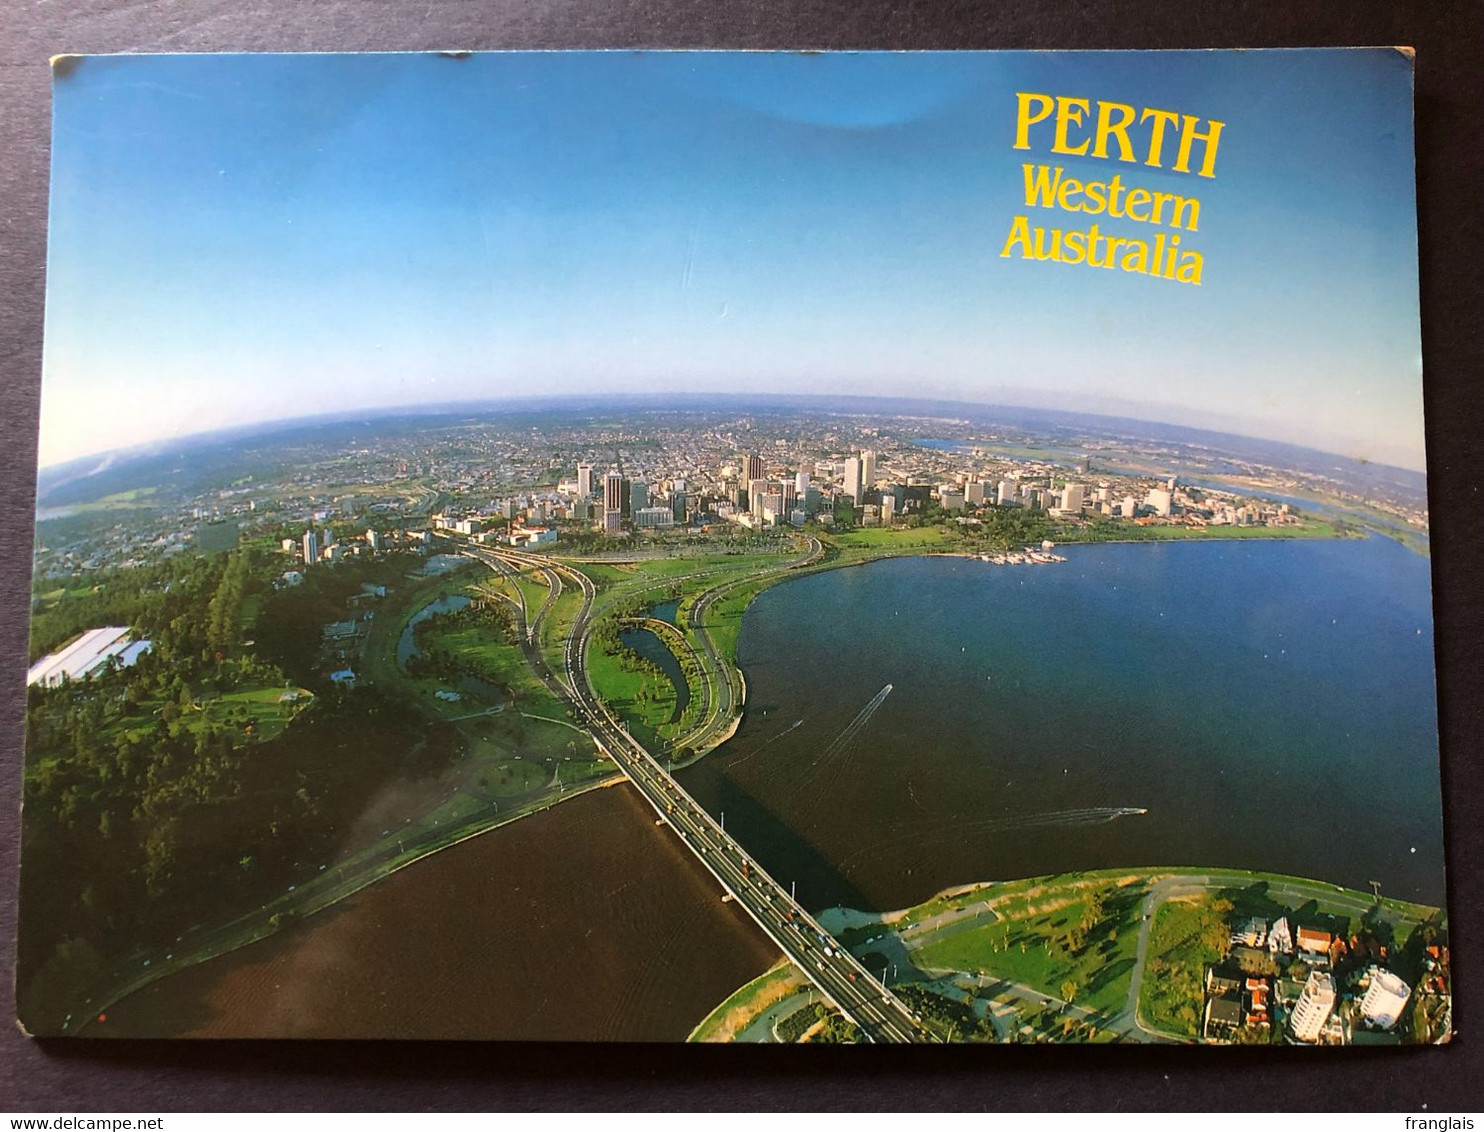 PERTH. Western Australia, Aerial View Of The Narrows Bridge And Perth City, Published By Midge, W.A. - Perth